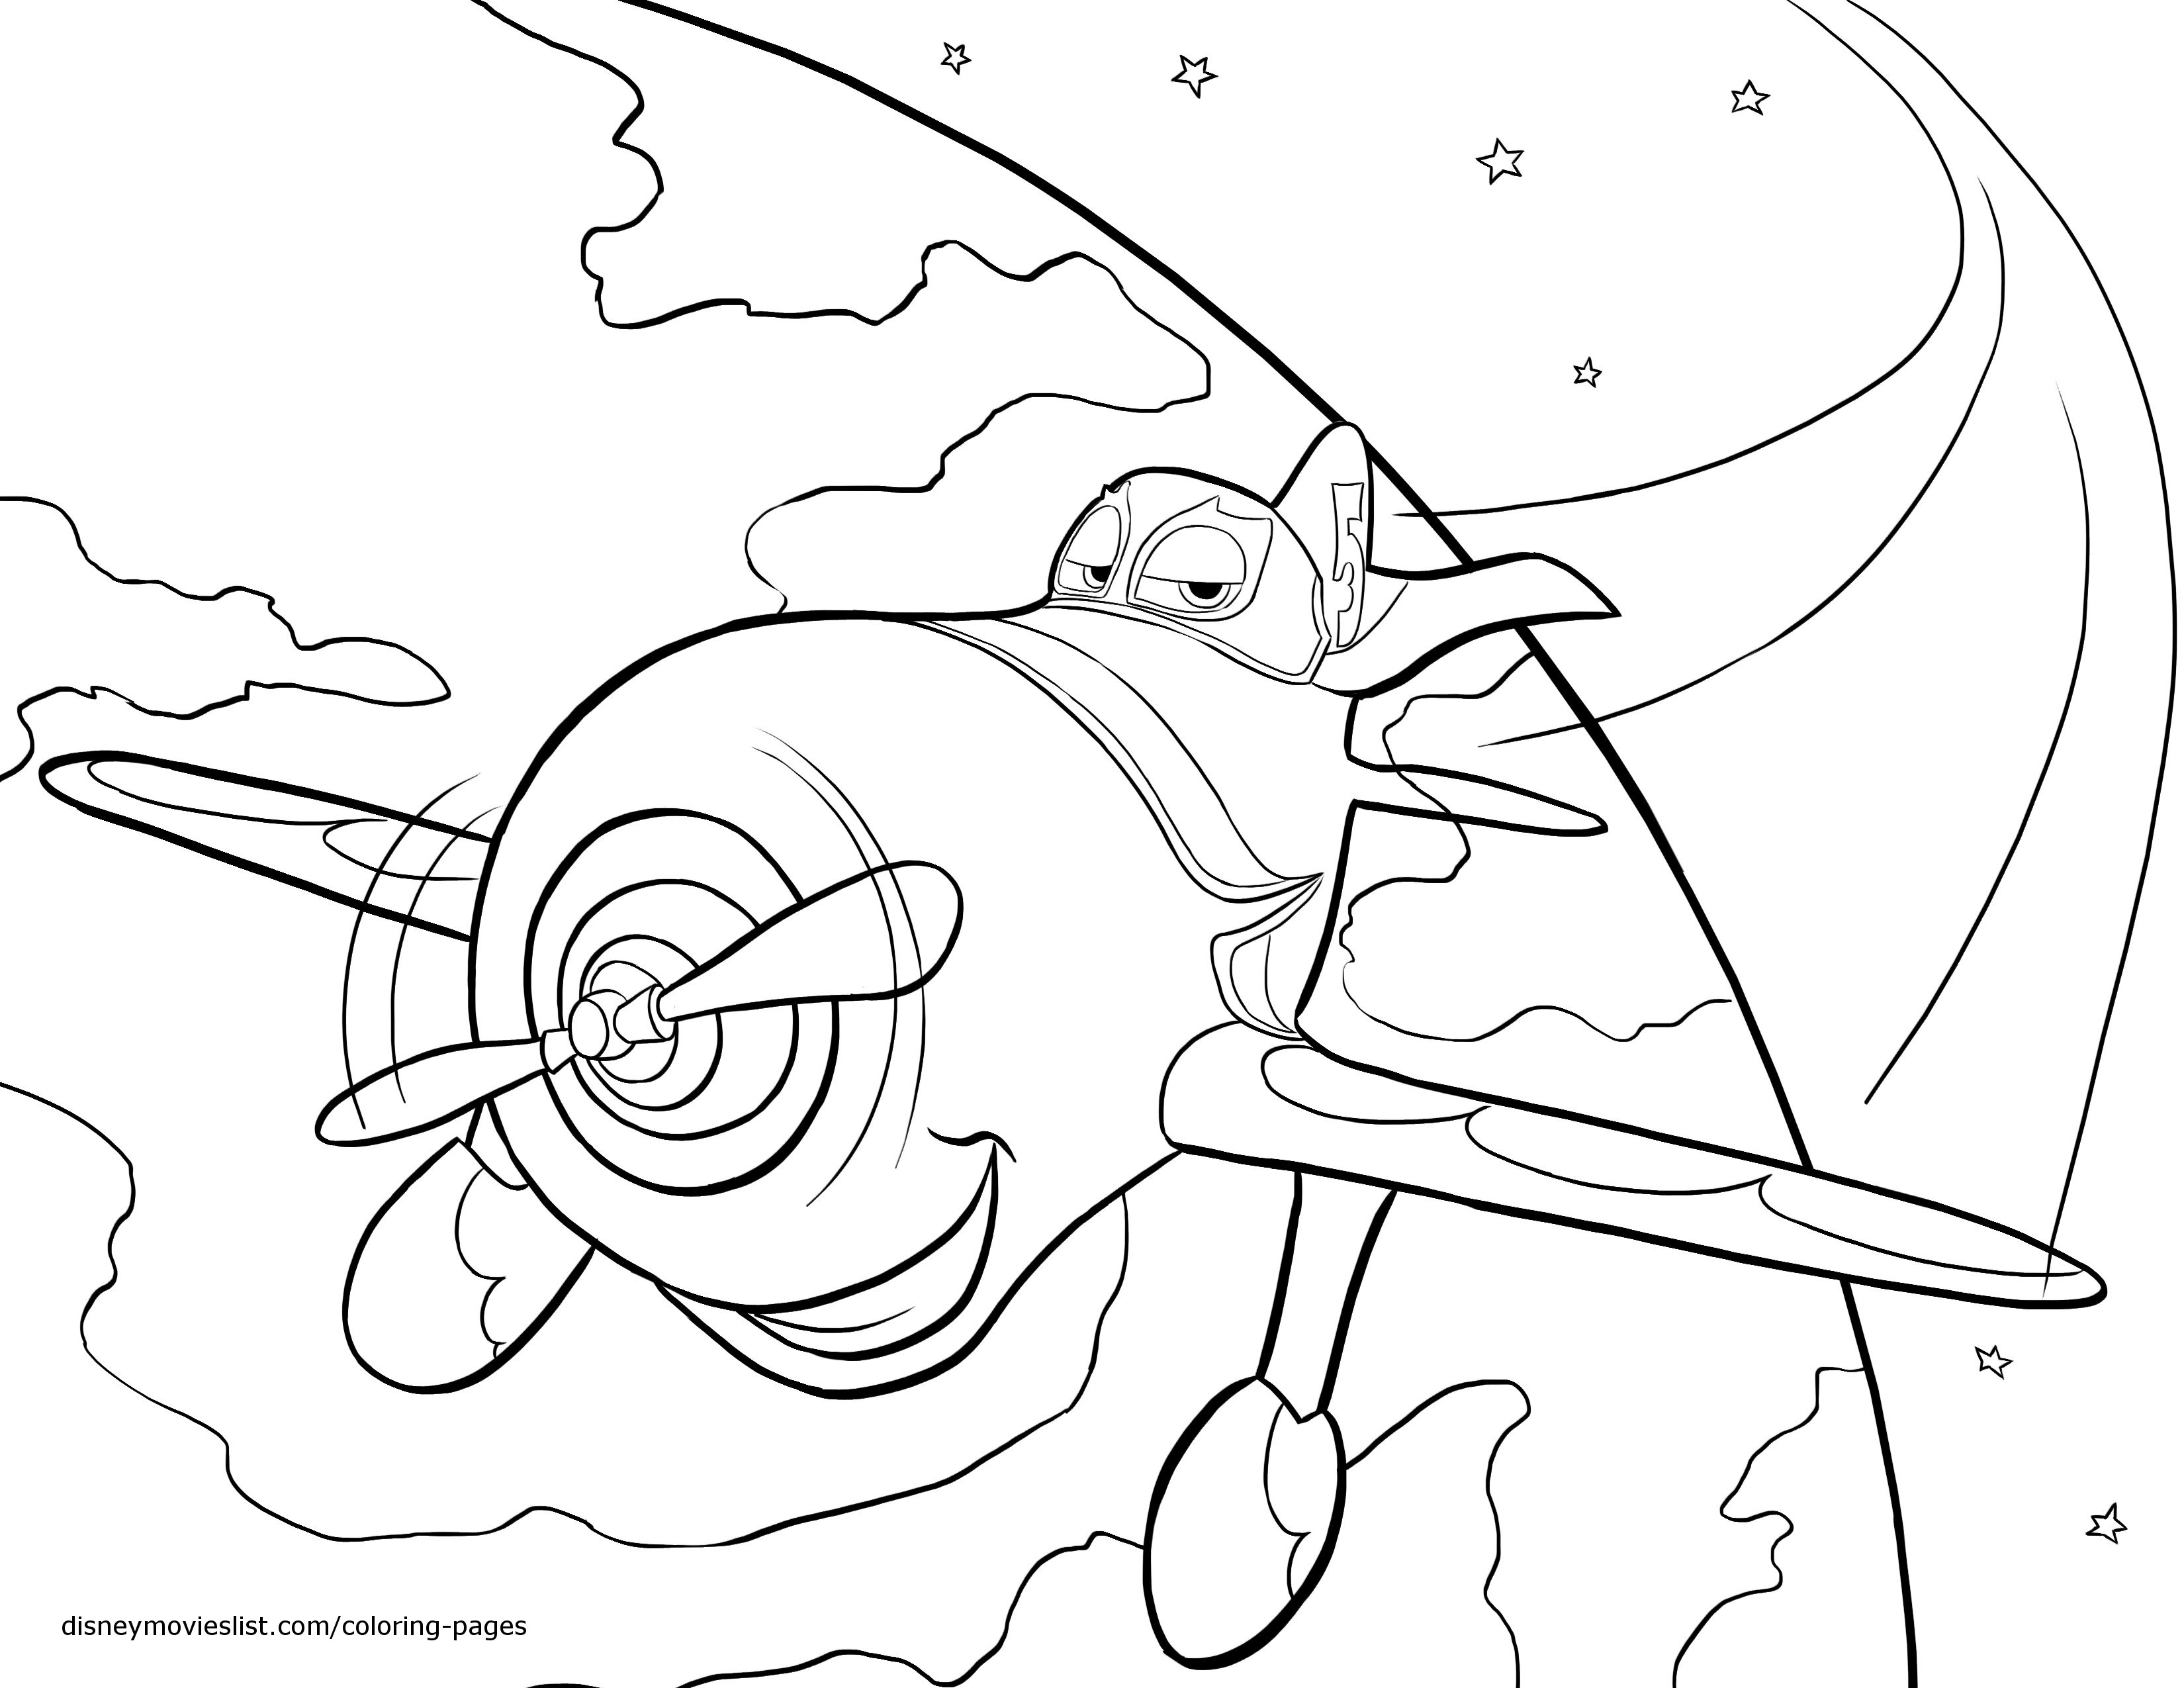 Planes coloring #10, Download drawings